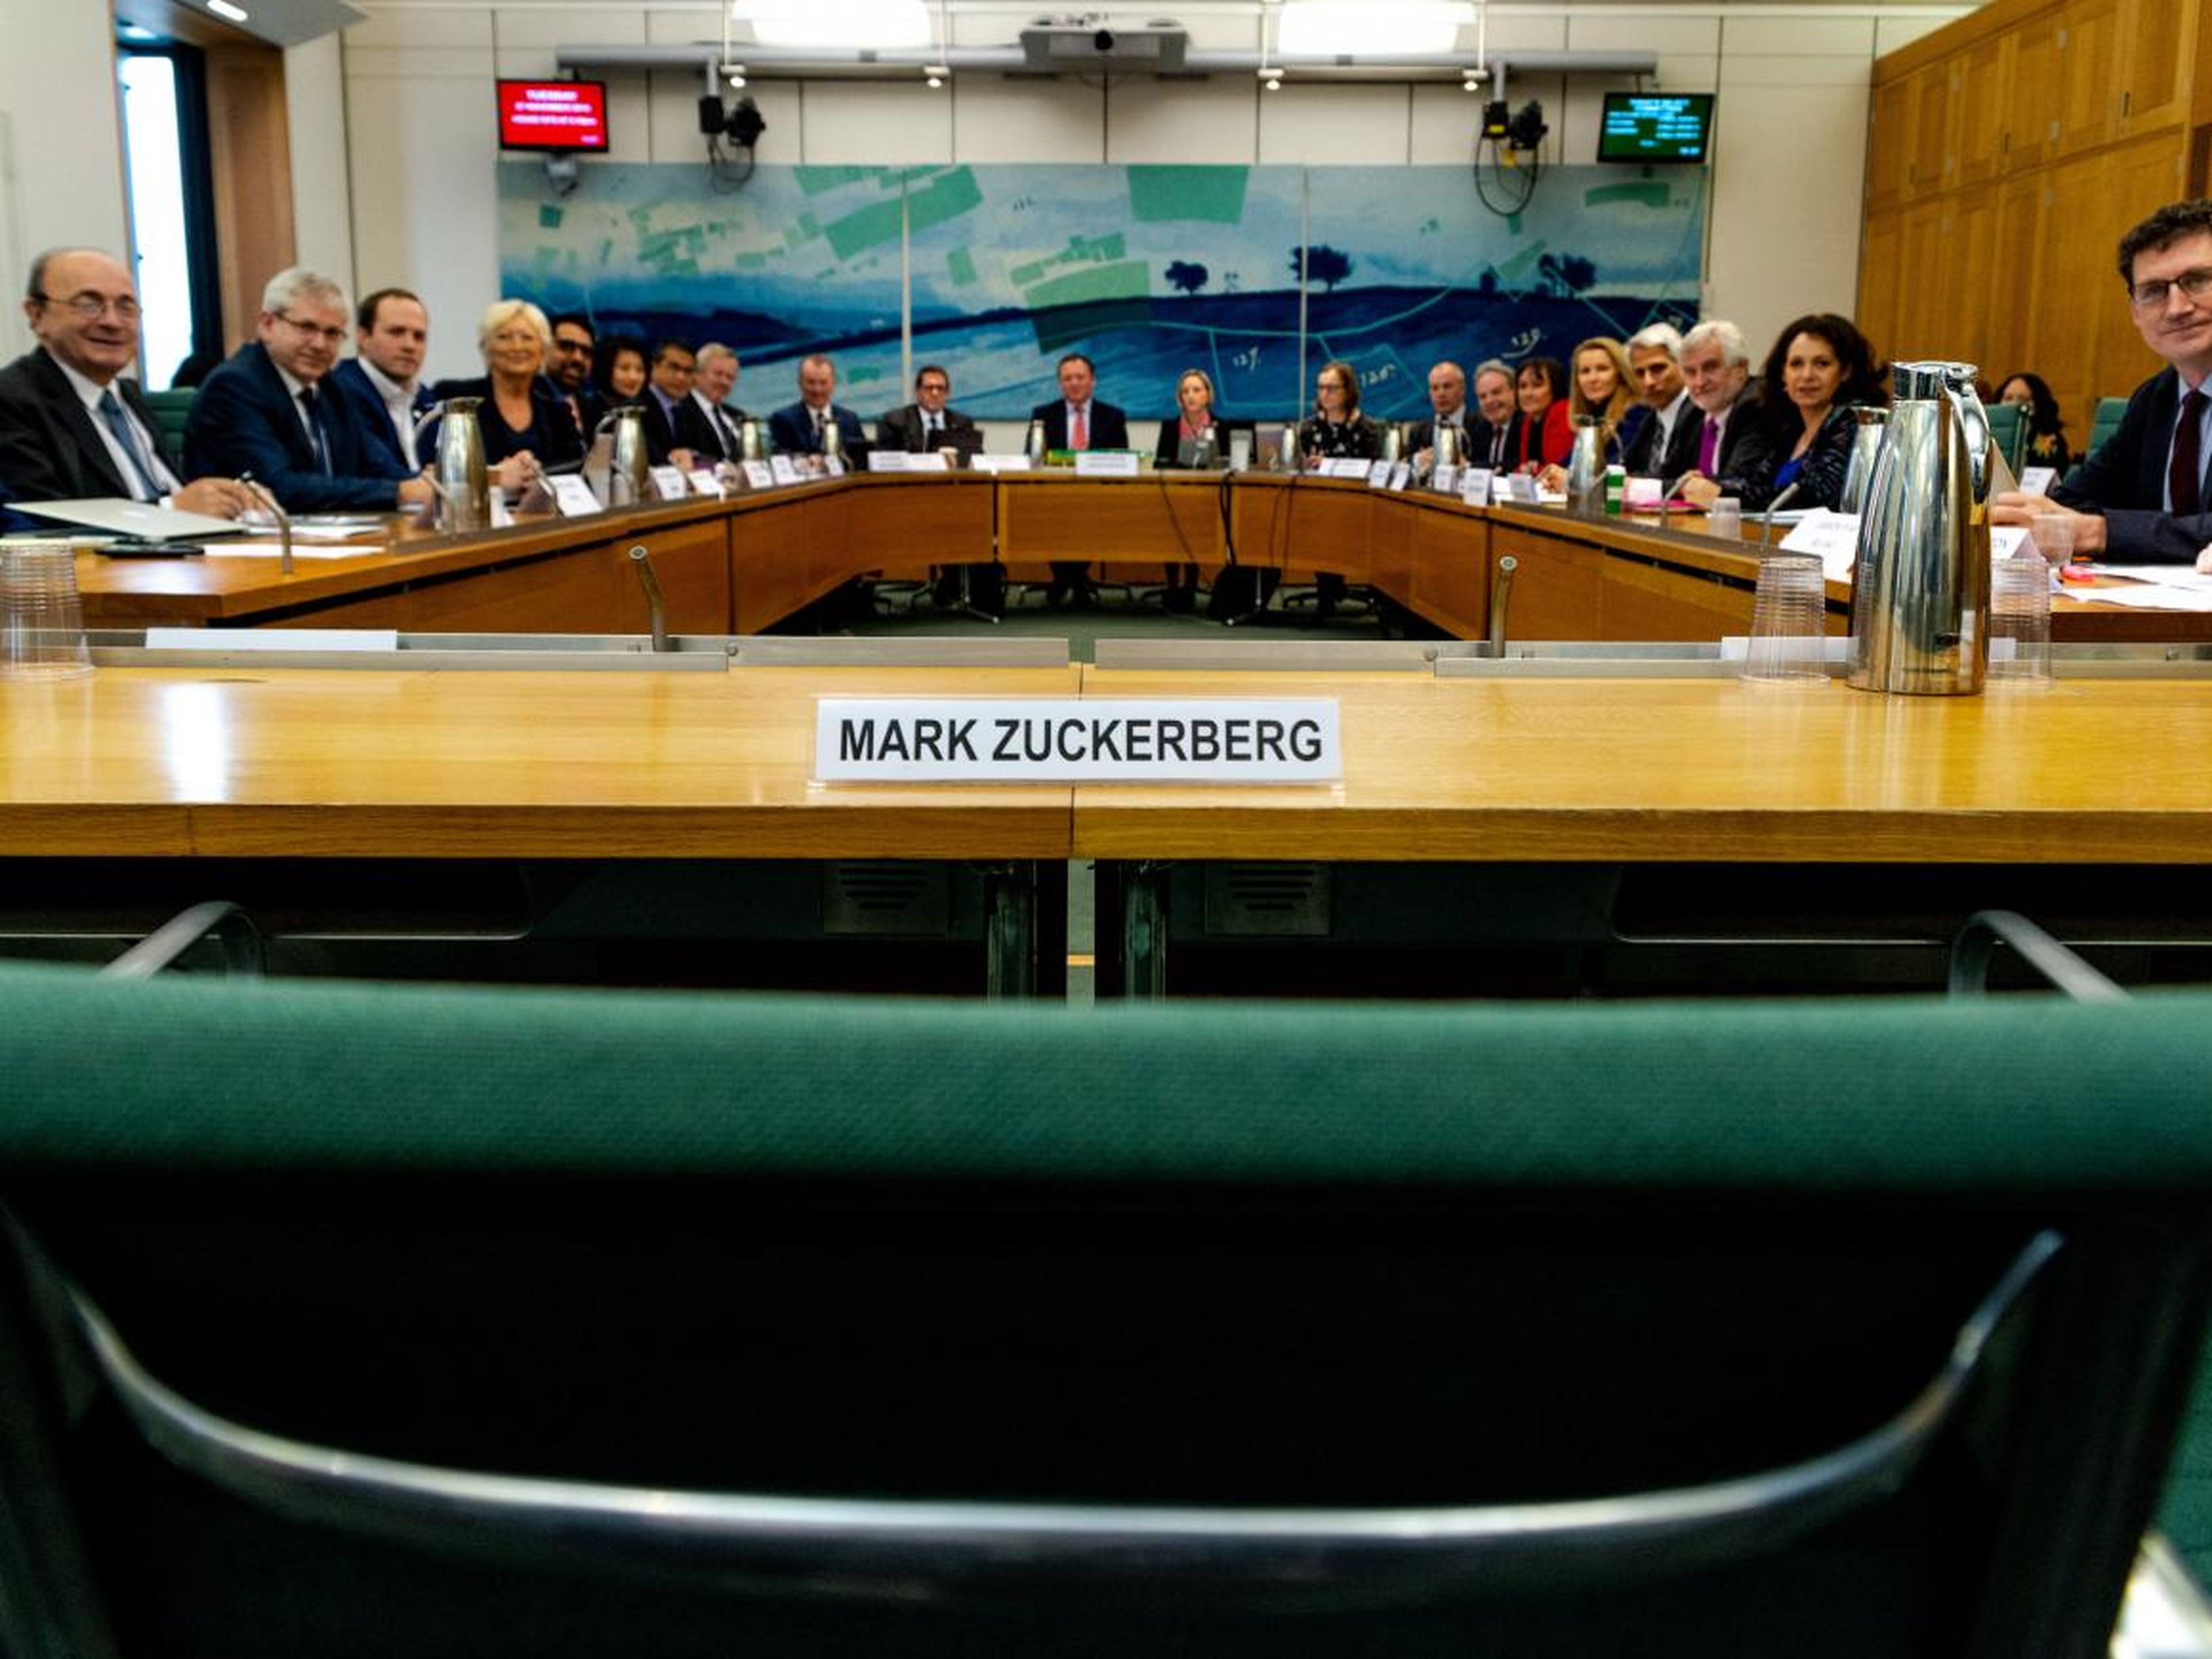 The committee left an empty chair for Zuckerberg.